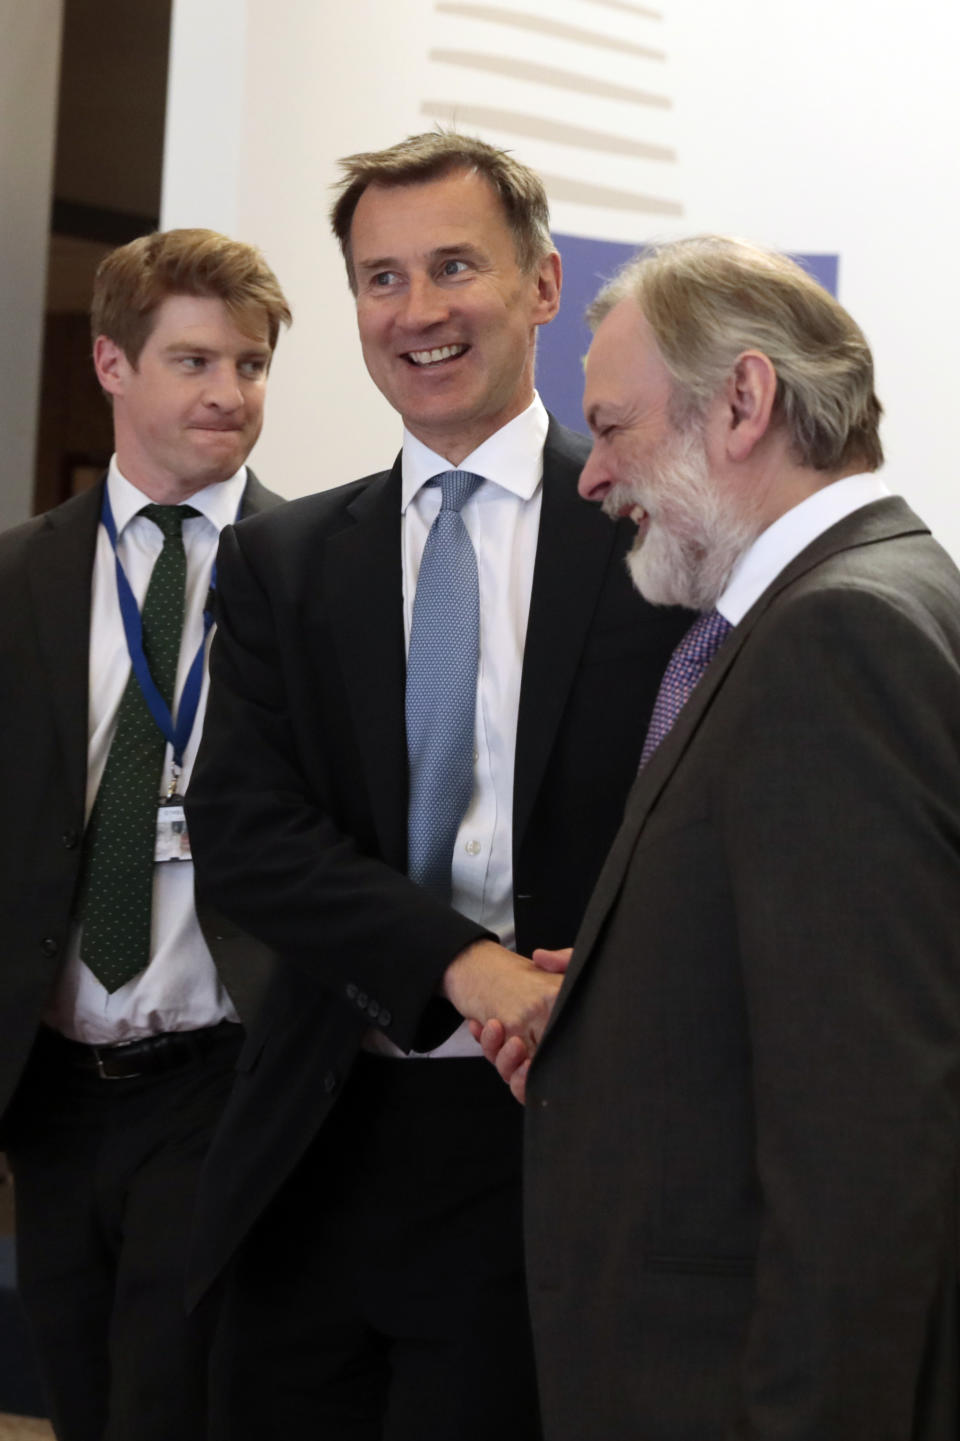 British Foreign Secretary Jeremy Hunt, center, shakes hands with Britain's ambassador to the European Union Tim Barrow, right, after a meeting with European foreign ministers at the Europa building in Brussels, Monday, May 13, 2019. (AP Photo/Virginia Mayo)